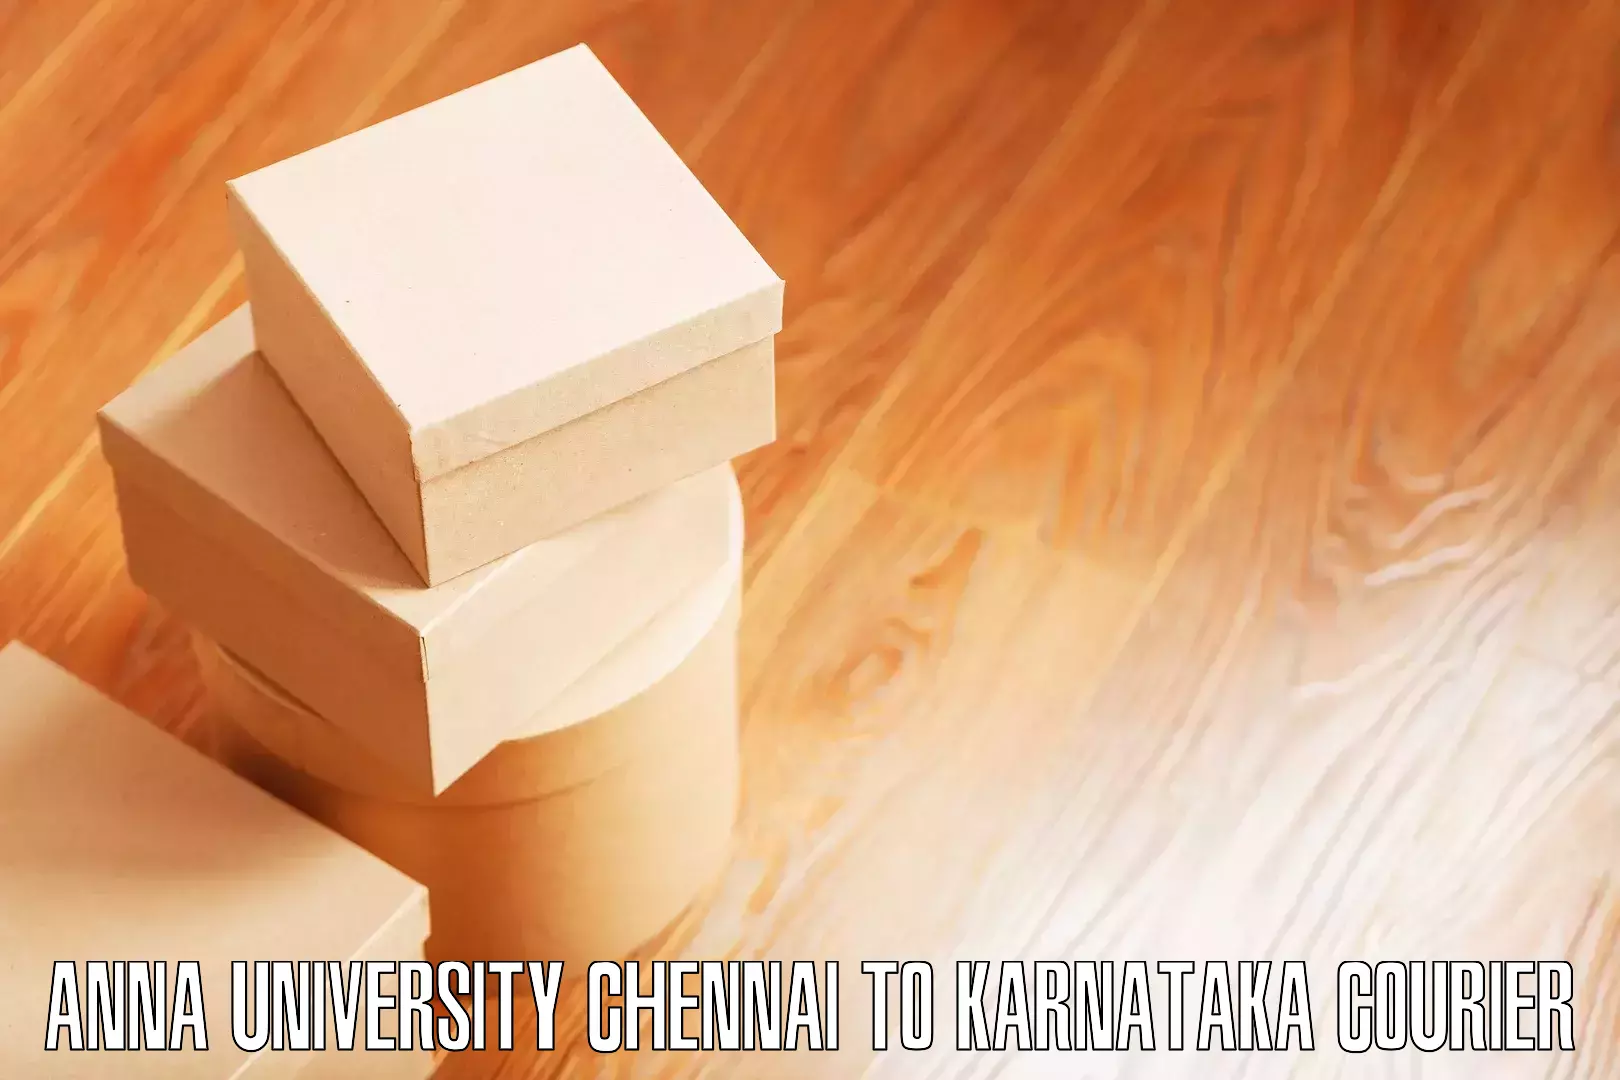 Furniture delivery service Anna University Chennai to Kollegal